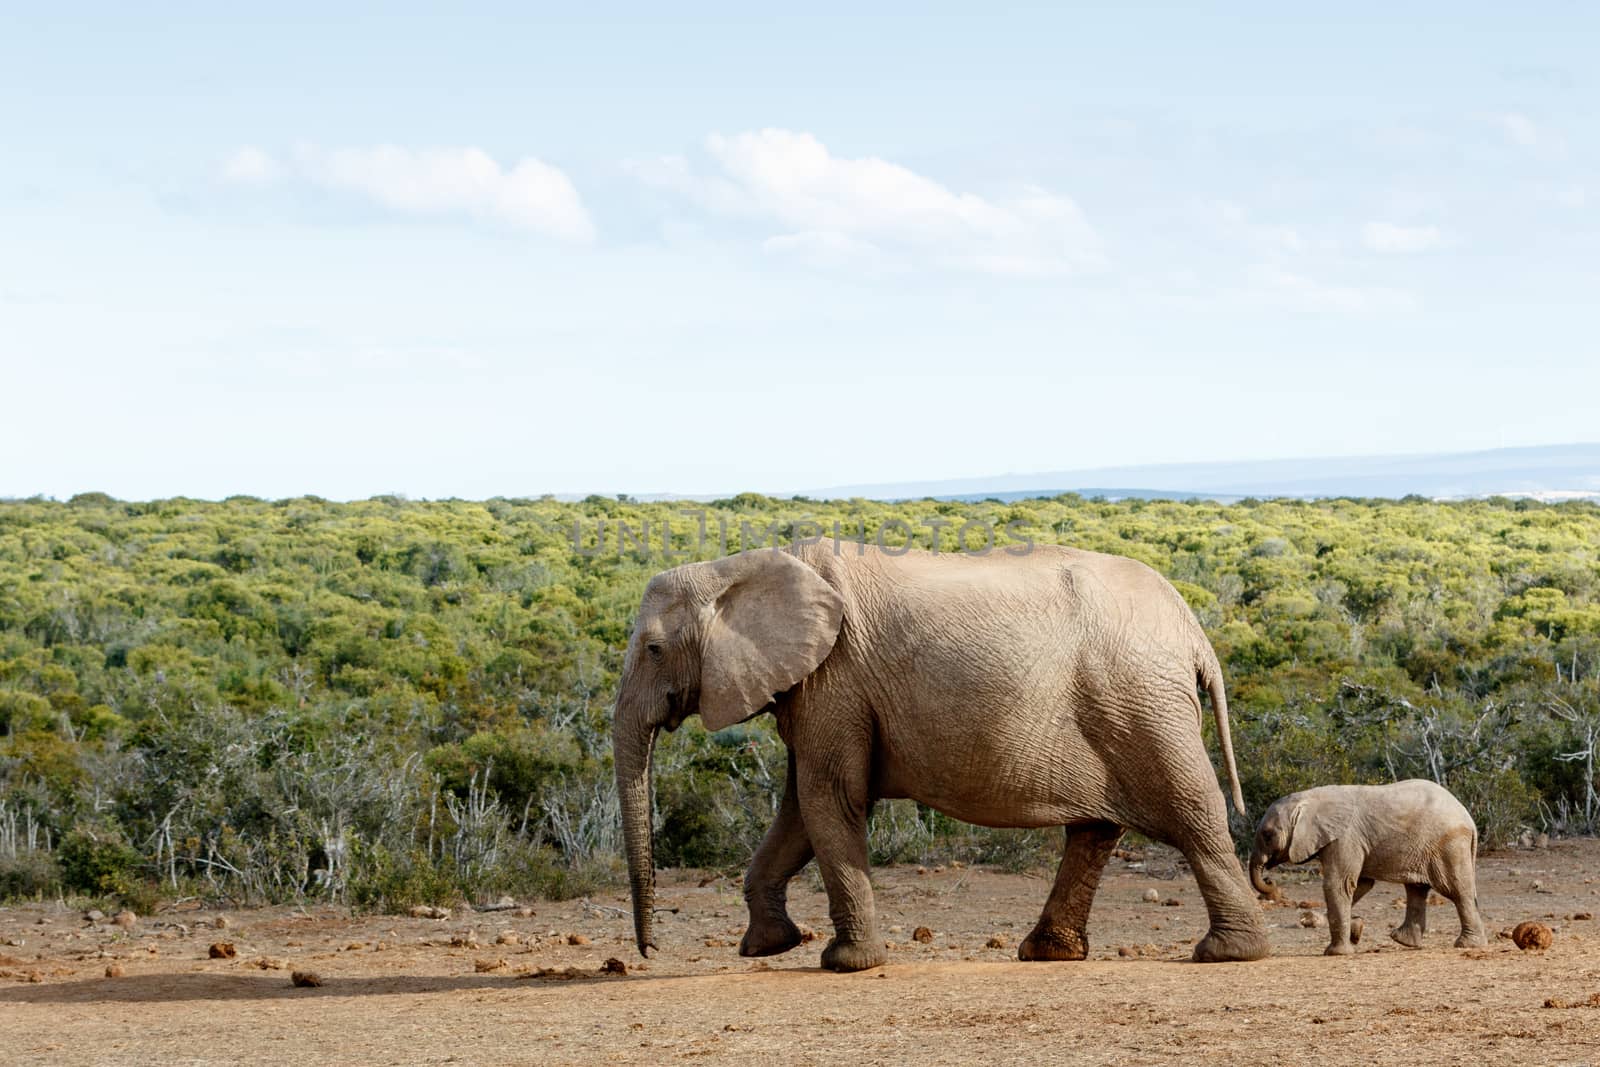 Long Walk To Free  Freedom - African Bush Elephant - The African bush elephant is the larger of the two species of African elephant. Both it and the African forest elephant have in the past been classified as a single species.